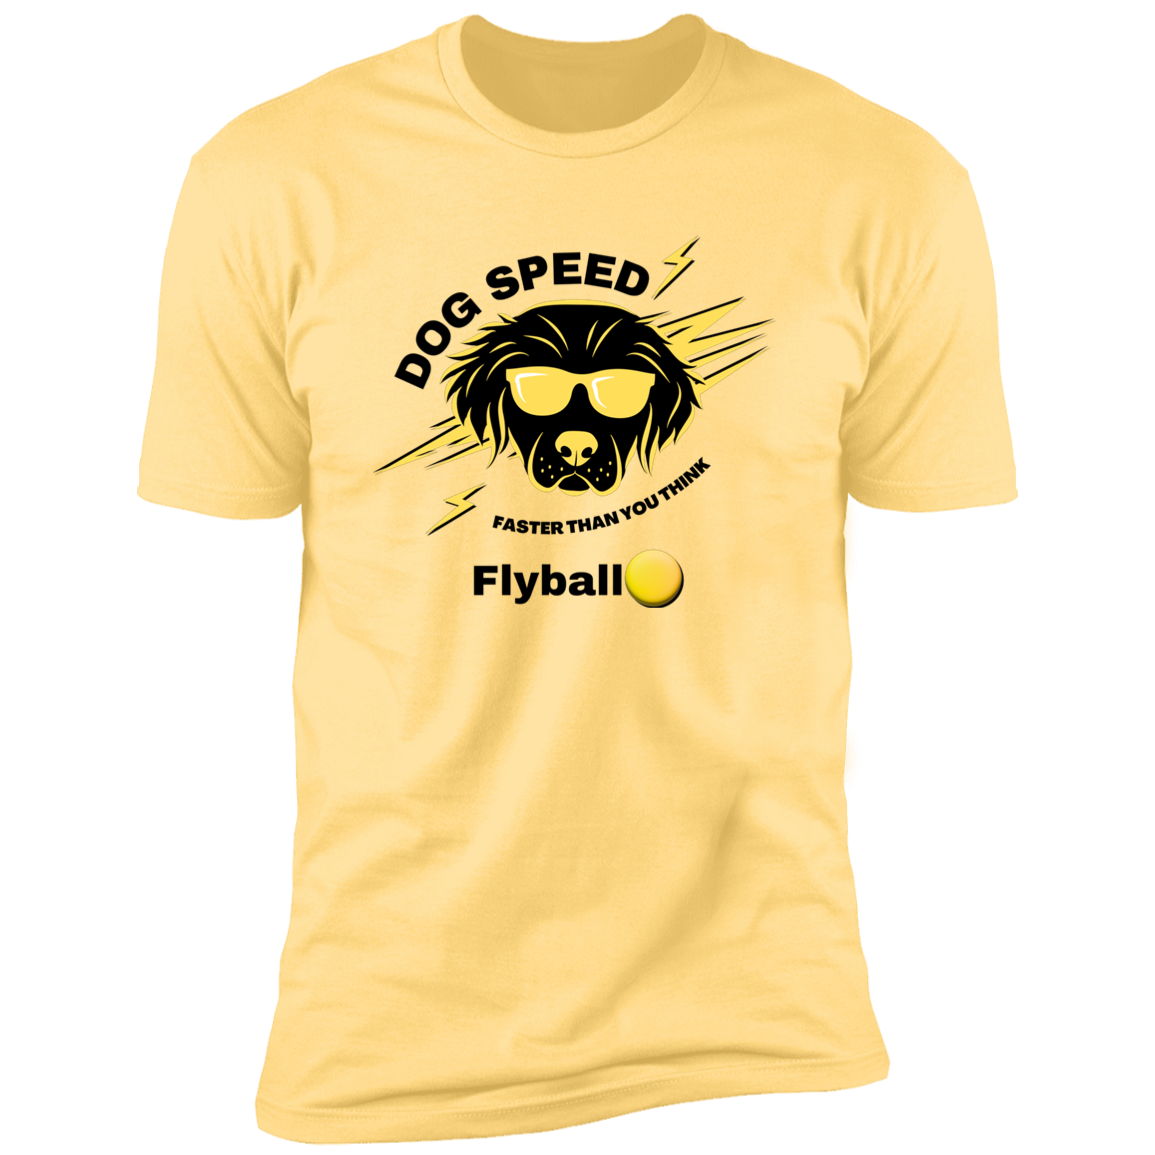 Dog Speed Faster Than You Think Flyball T-shirt, Flyball shirt dog shirt for humans, in banana cream